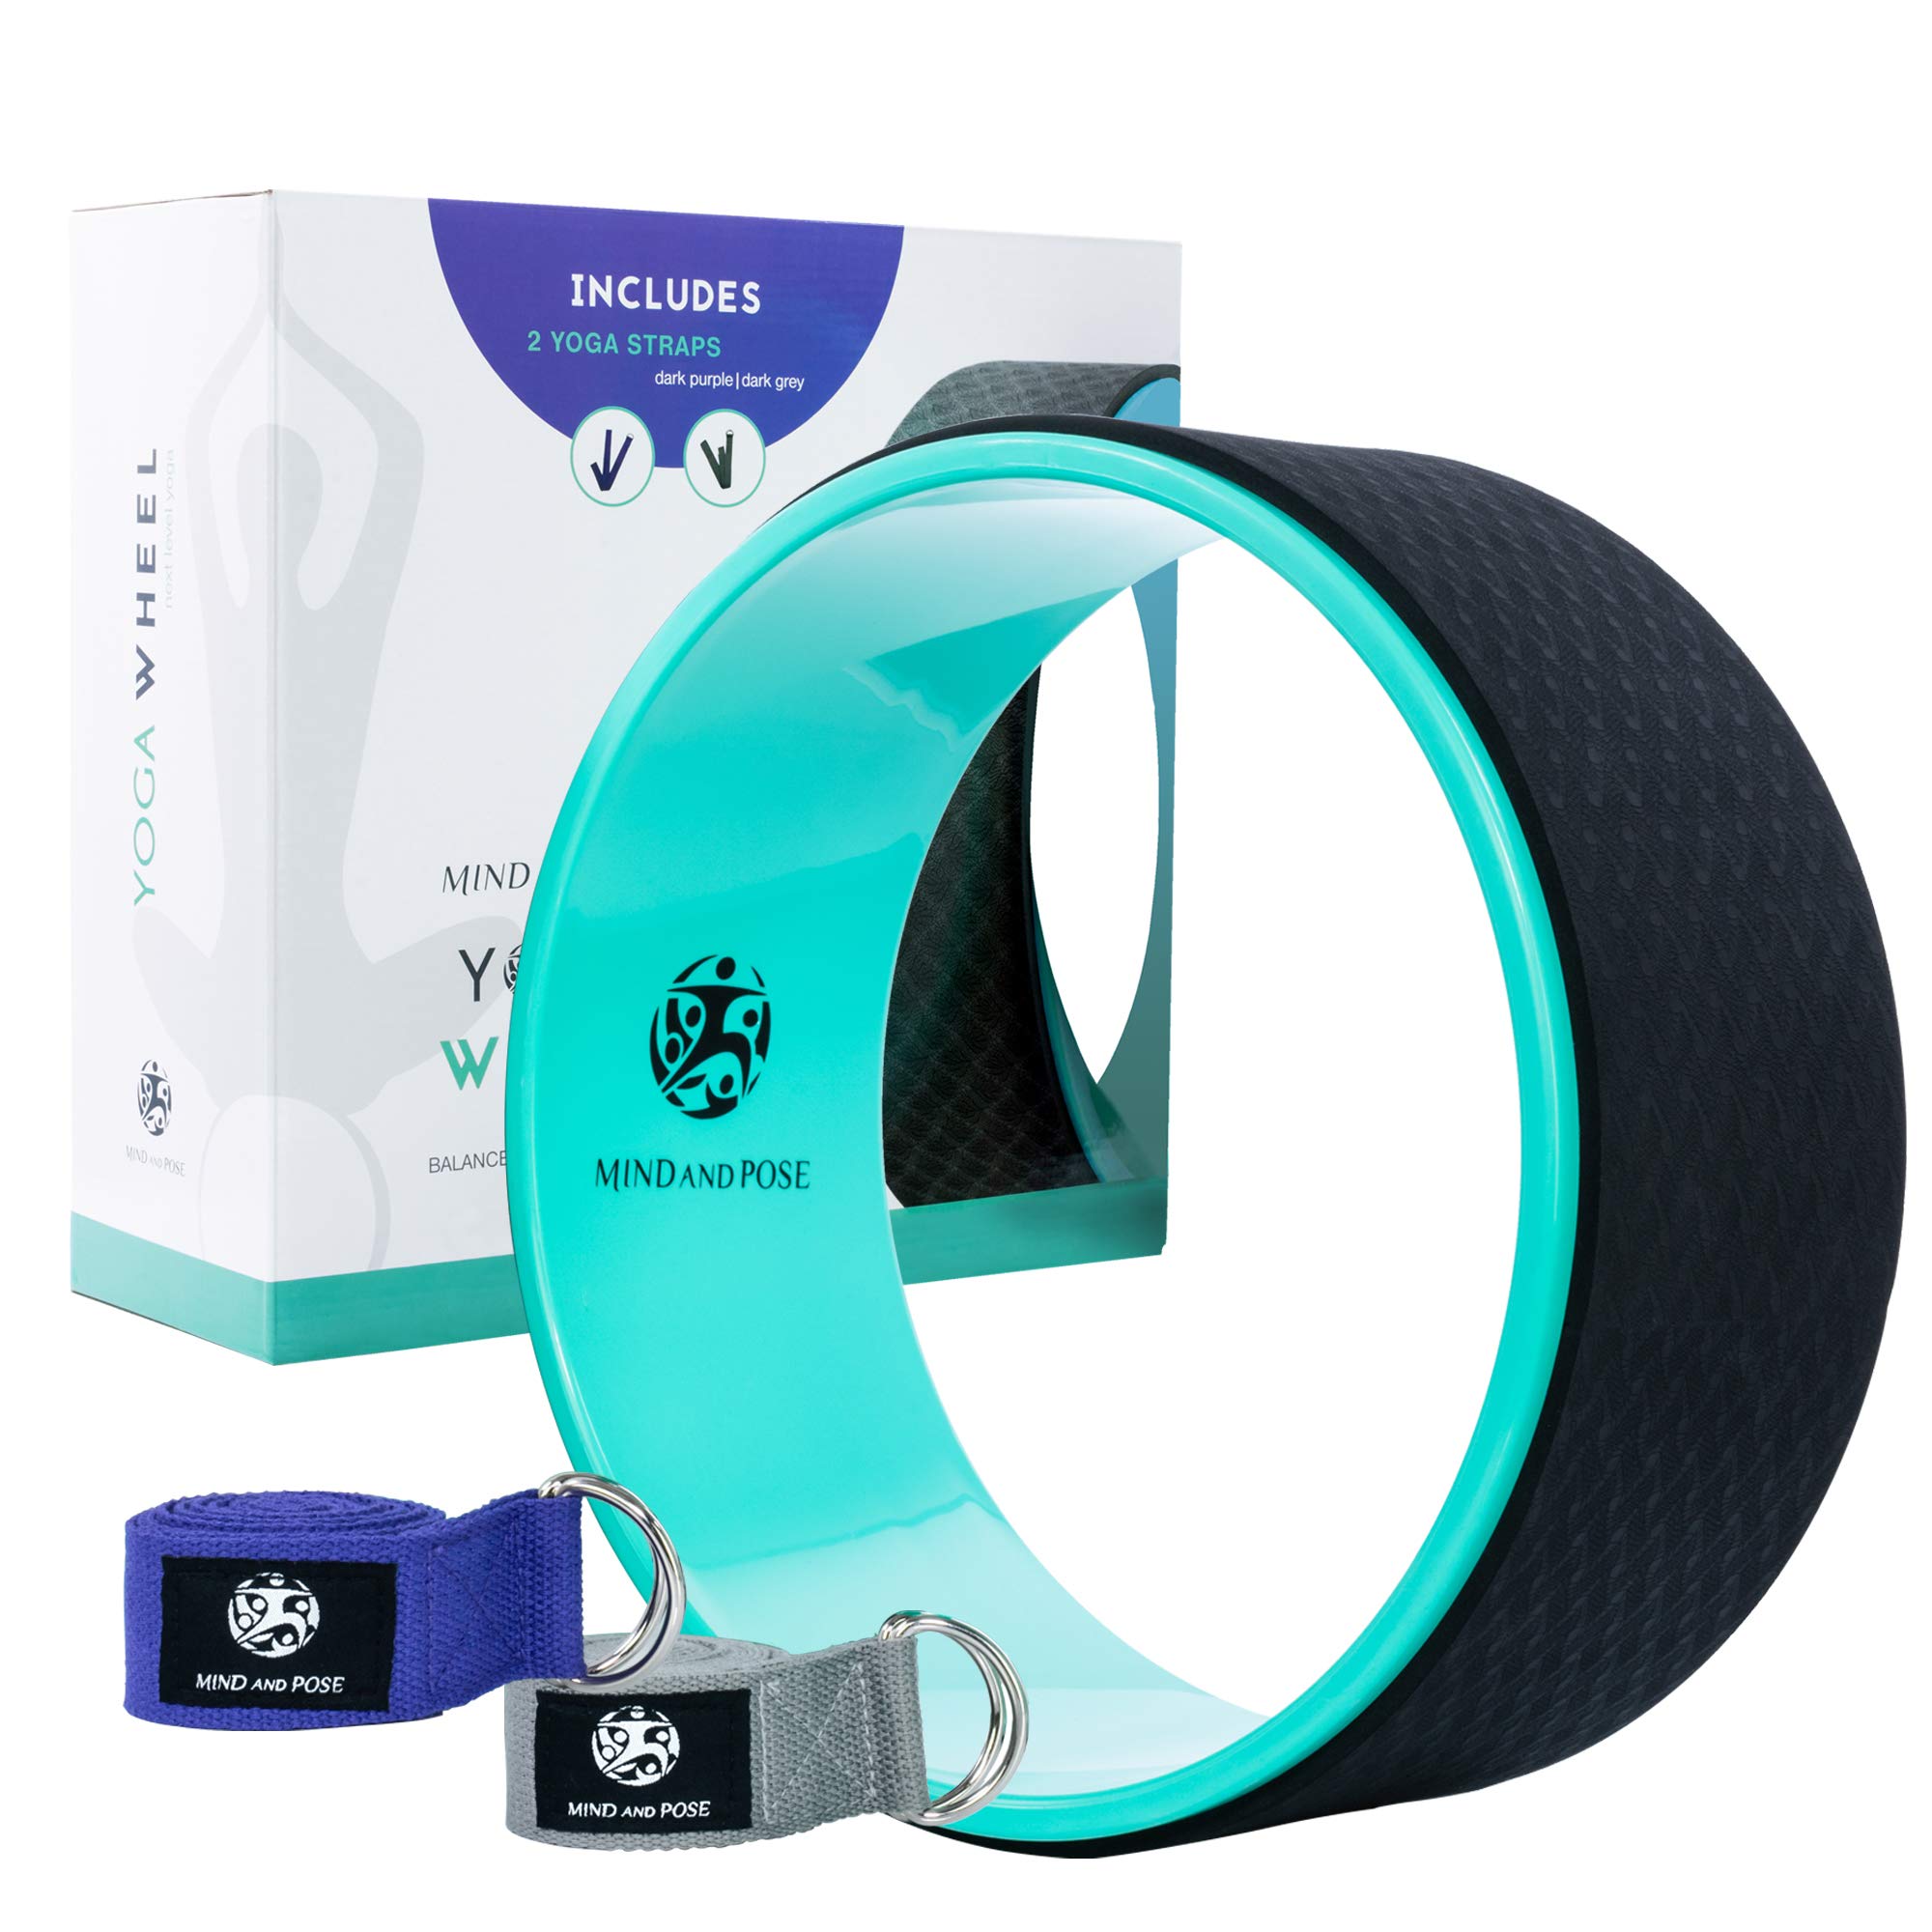 Unlock Your Flexibility and Balance: The Mind and Pose Dharma Back Wheel with 2 Fitness Straps - Stretching, Pain Relief, Backbend Mastery, and Eco-Friendly Design.